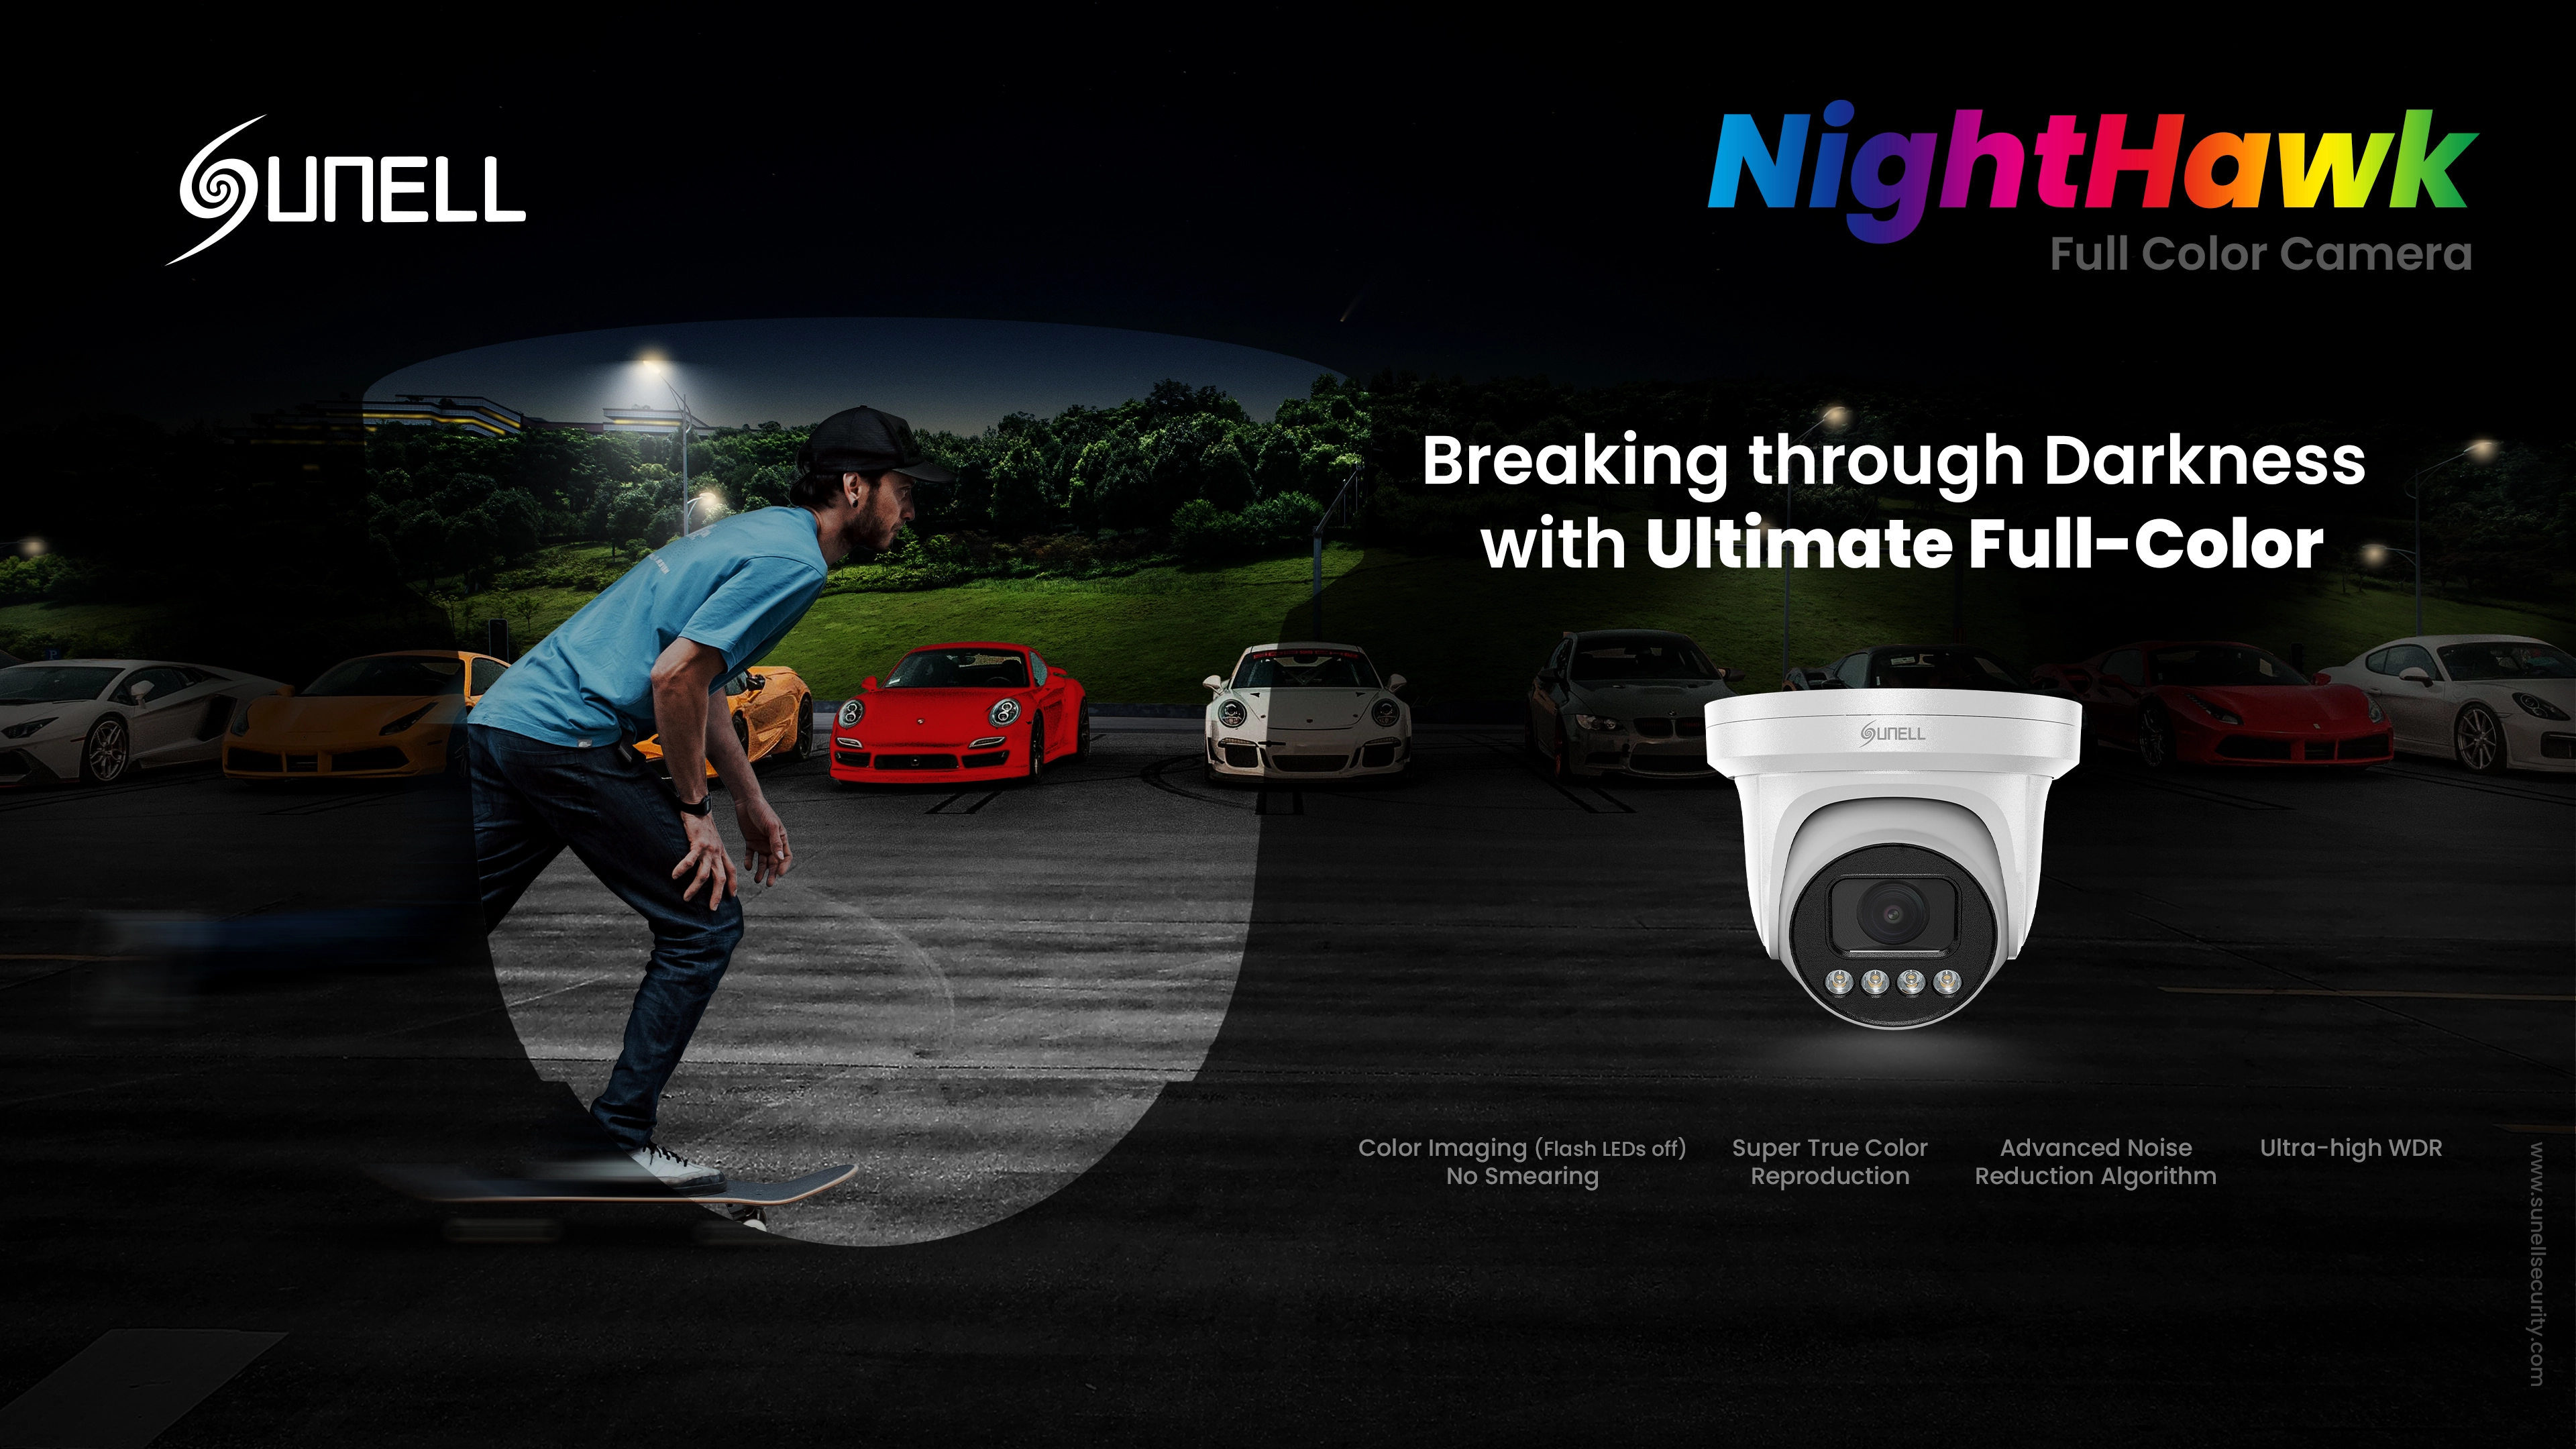 Night Hawk-Sunell Ultra-Low-Light Intelligent Full-Color Camera is Coming